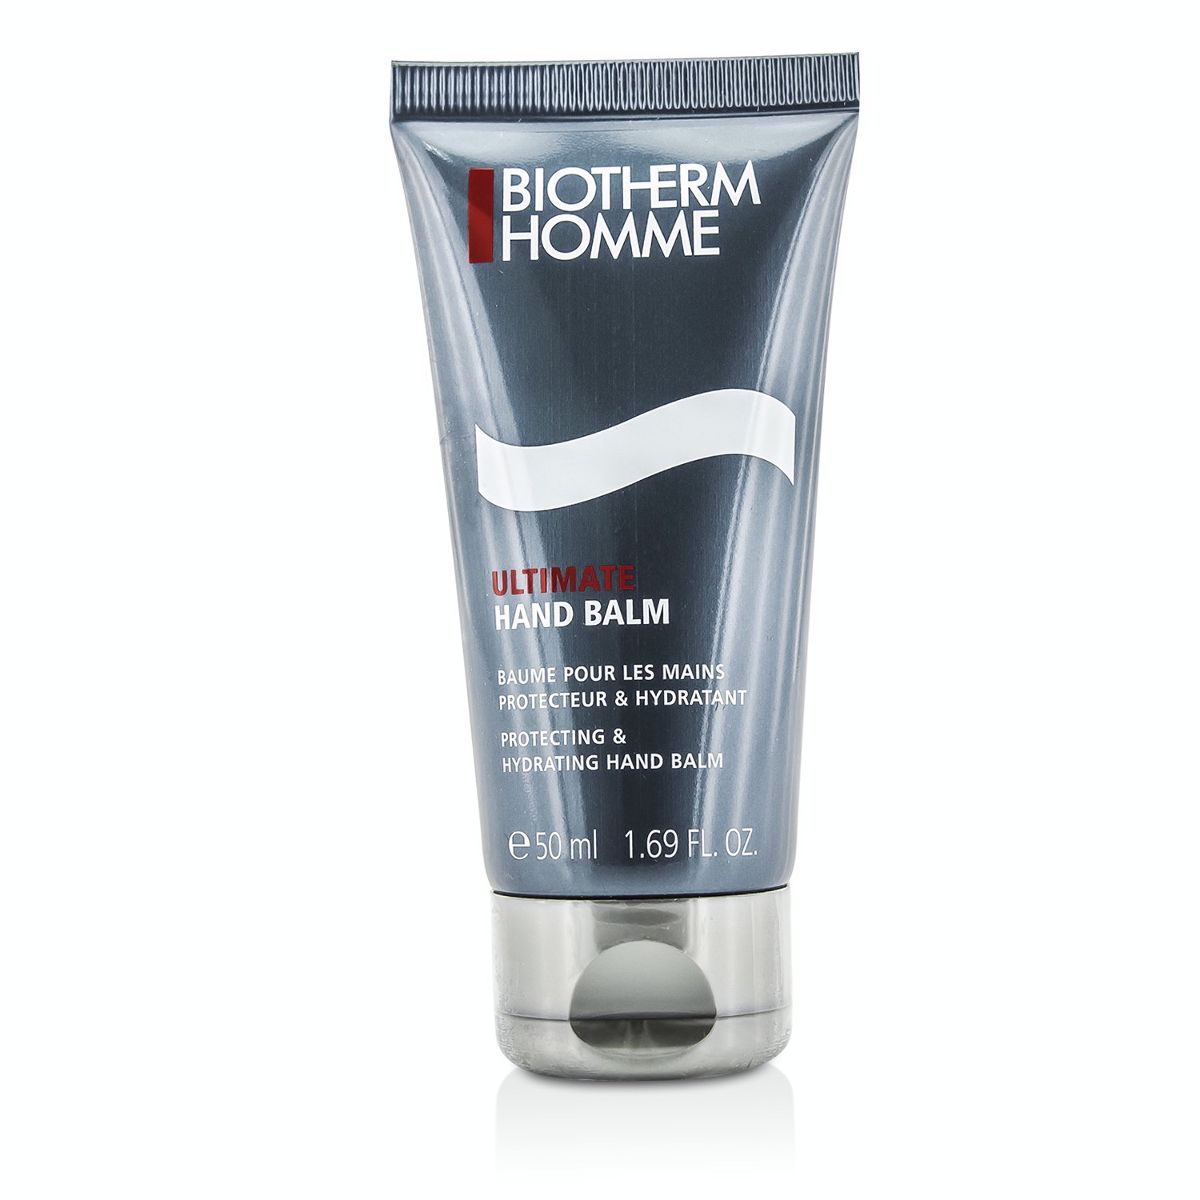 Homme Ultimate Hand Balm Biotherm Image